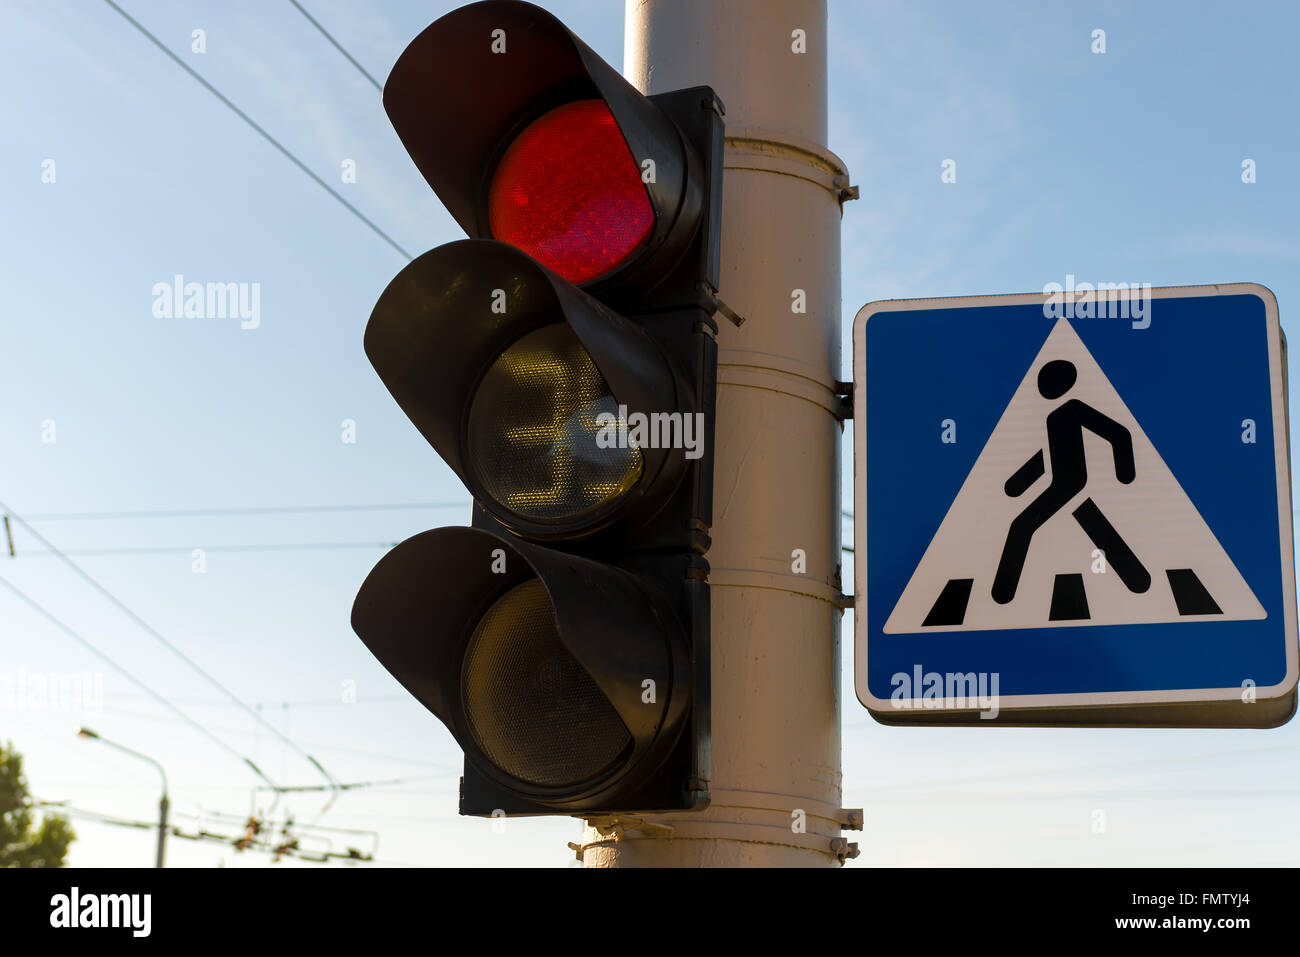 traffic light with a burning red lights in the city Stock Photo